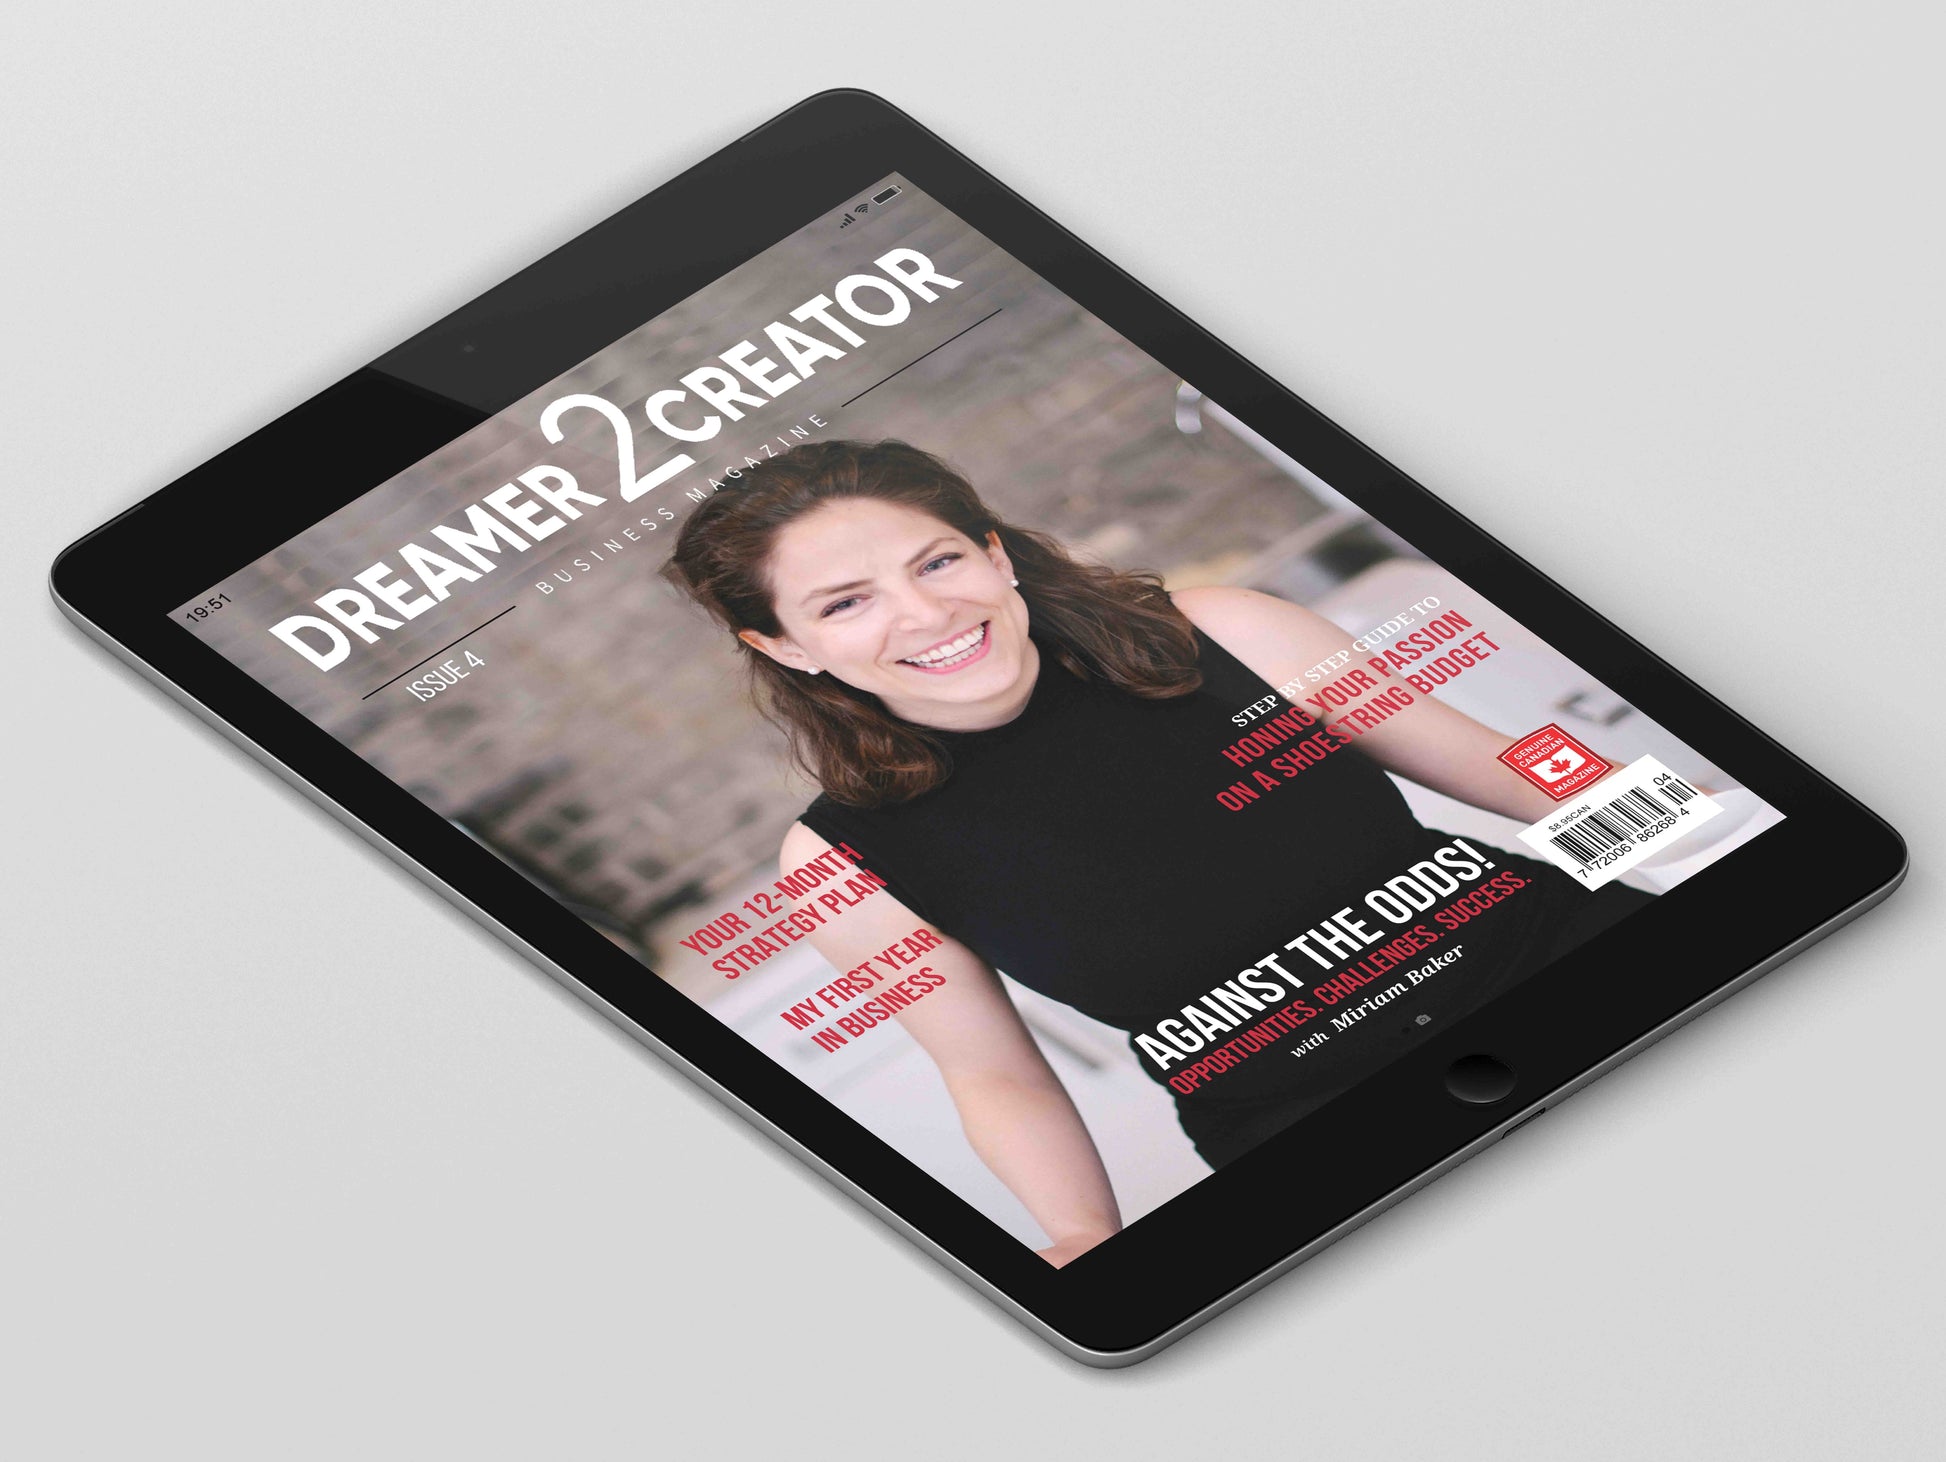 Issue 4 Digital version of Dreamer 2 Creator Business Magazine. Can be read on a tablet, phone or computer